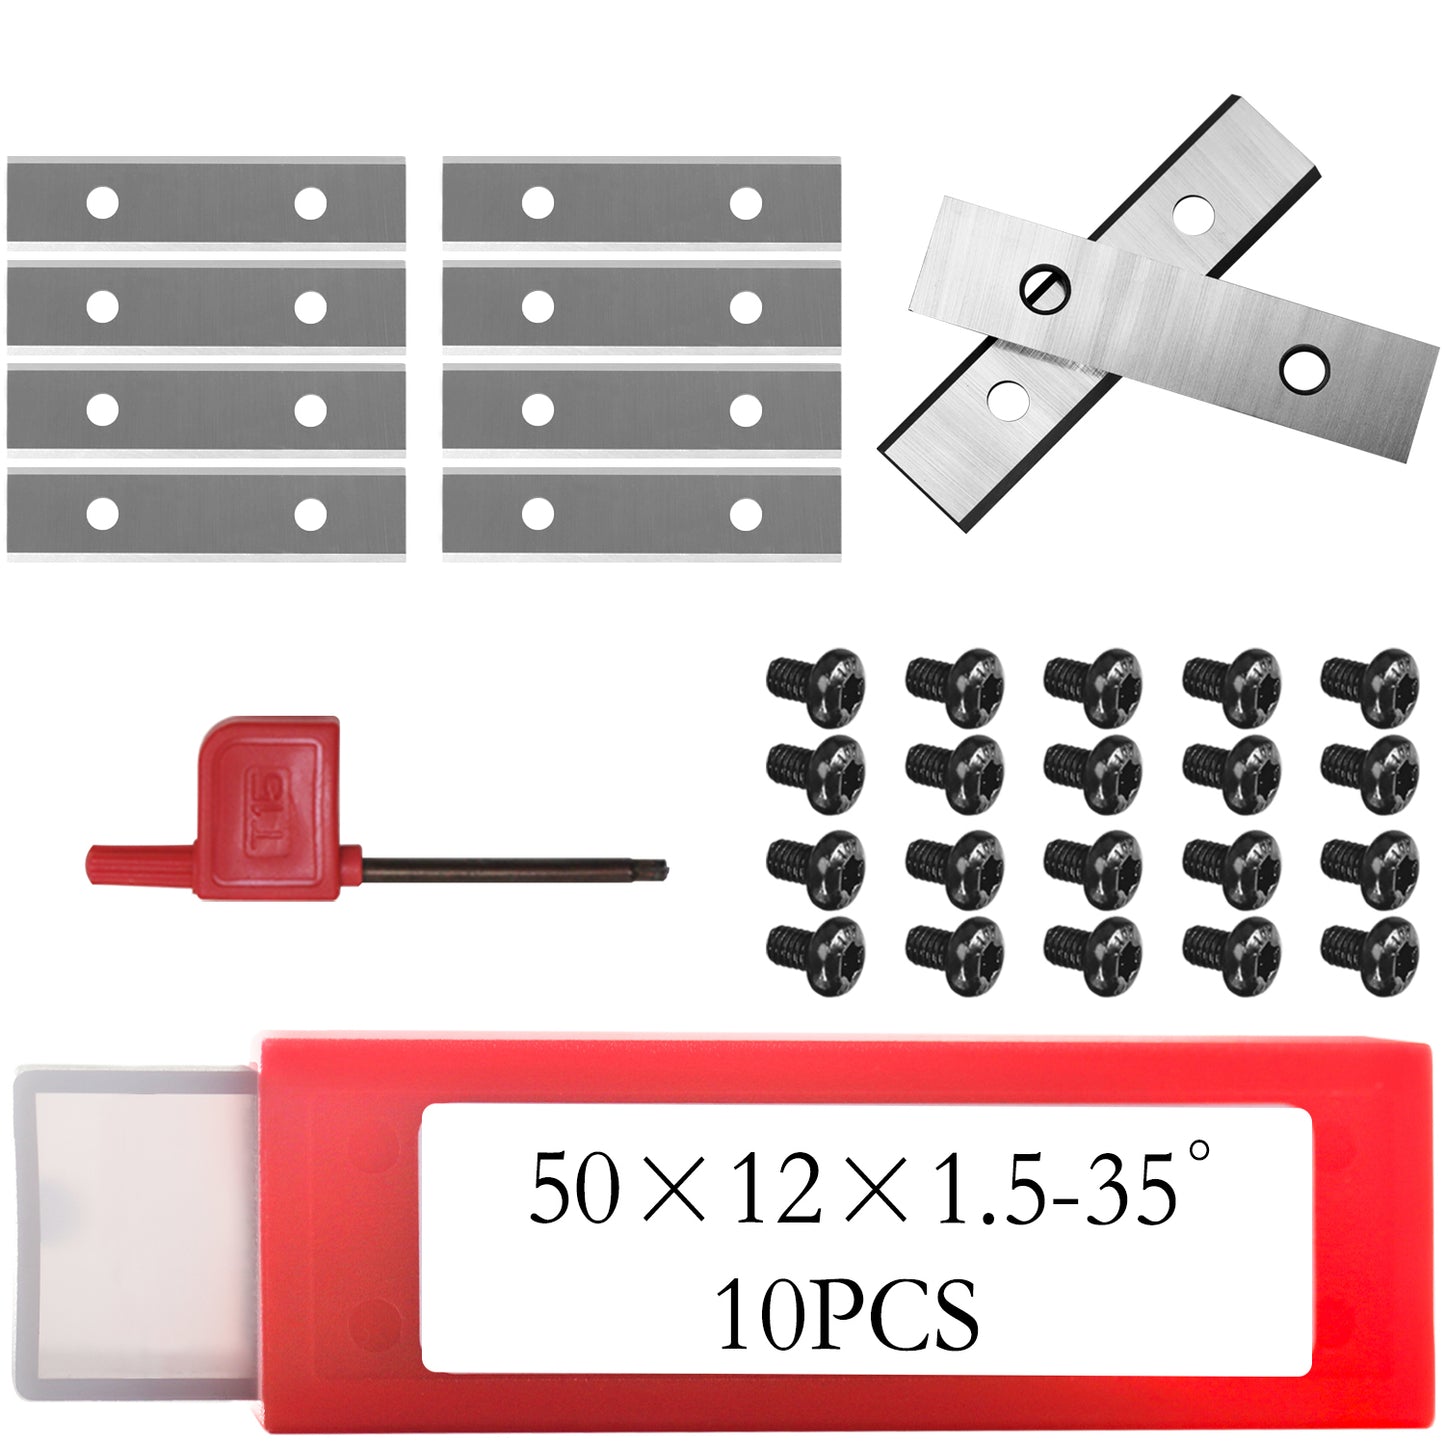 yeptooling replaceable tungsten carbide insert blade 50x12x1.5mm-35° Z=2 10 pieces for double bearing flush trim router bit